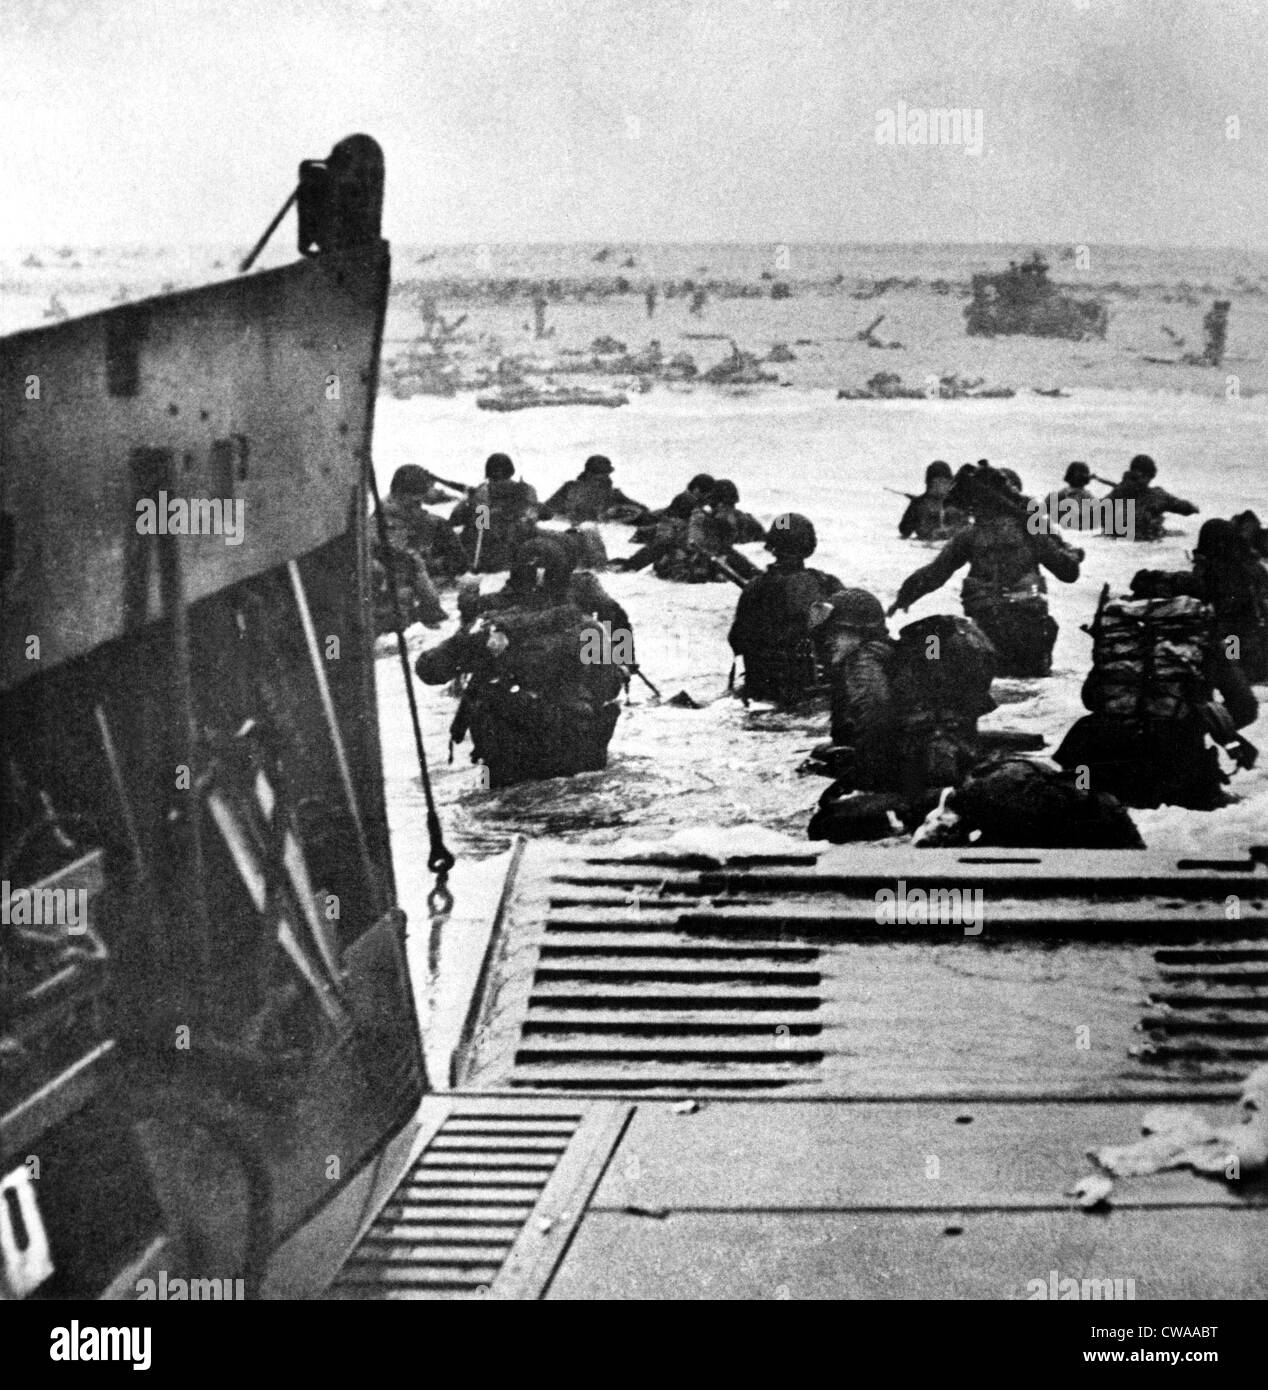 World War II: Led by amphibious tanks, British troops assault a beach.. Courtesy: CSU Archives / Everett Collection Stock Photo